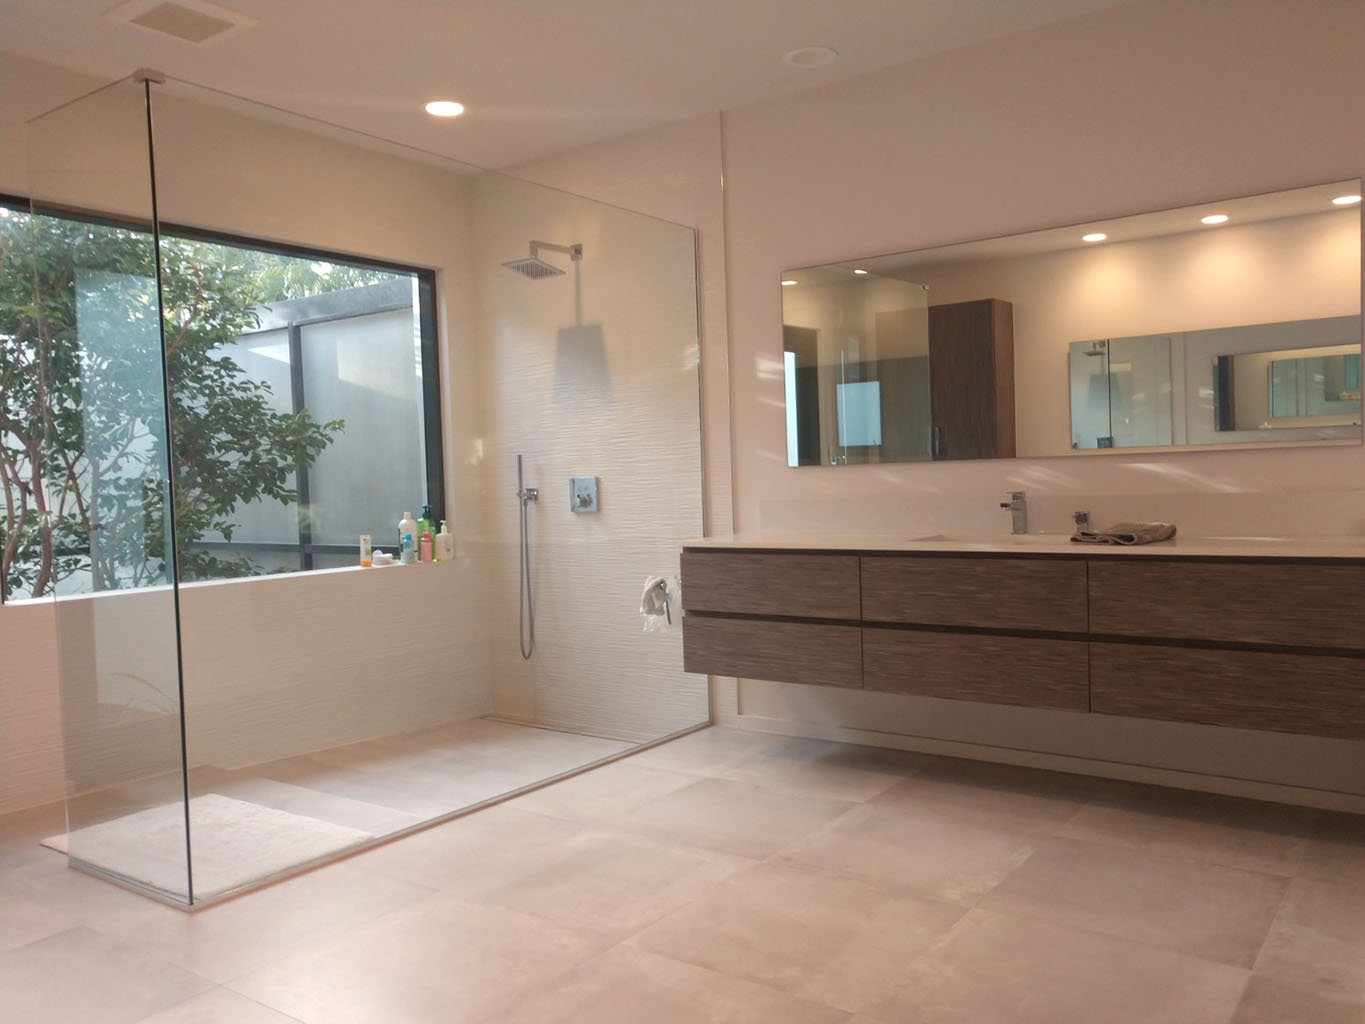 Master bath remodel with floating vanities, a large shower enclosure and freestanding bathtub